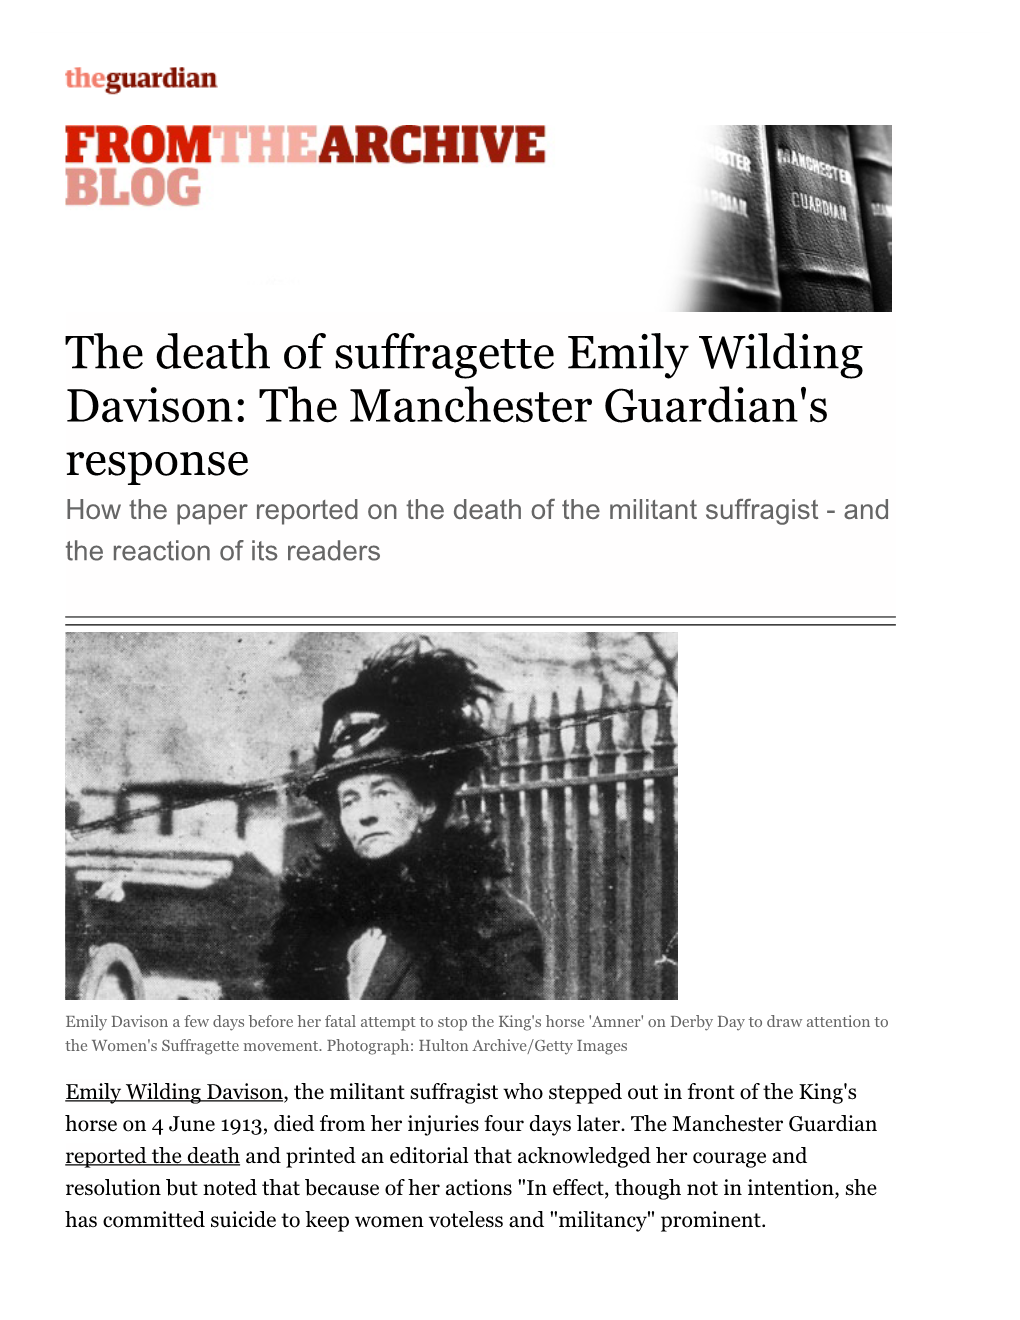 The Death of Suffragette Emily Wilding Davison: the Manchester Guardian's Response | from the Guardian | Guardian.Co.Uk